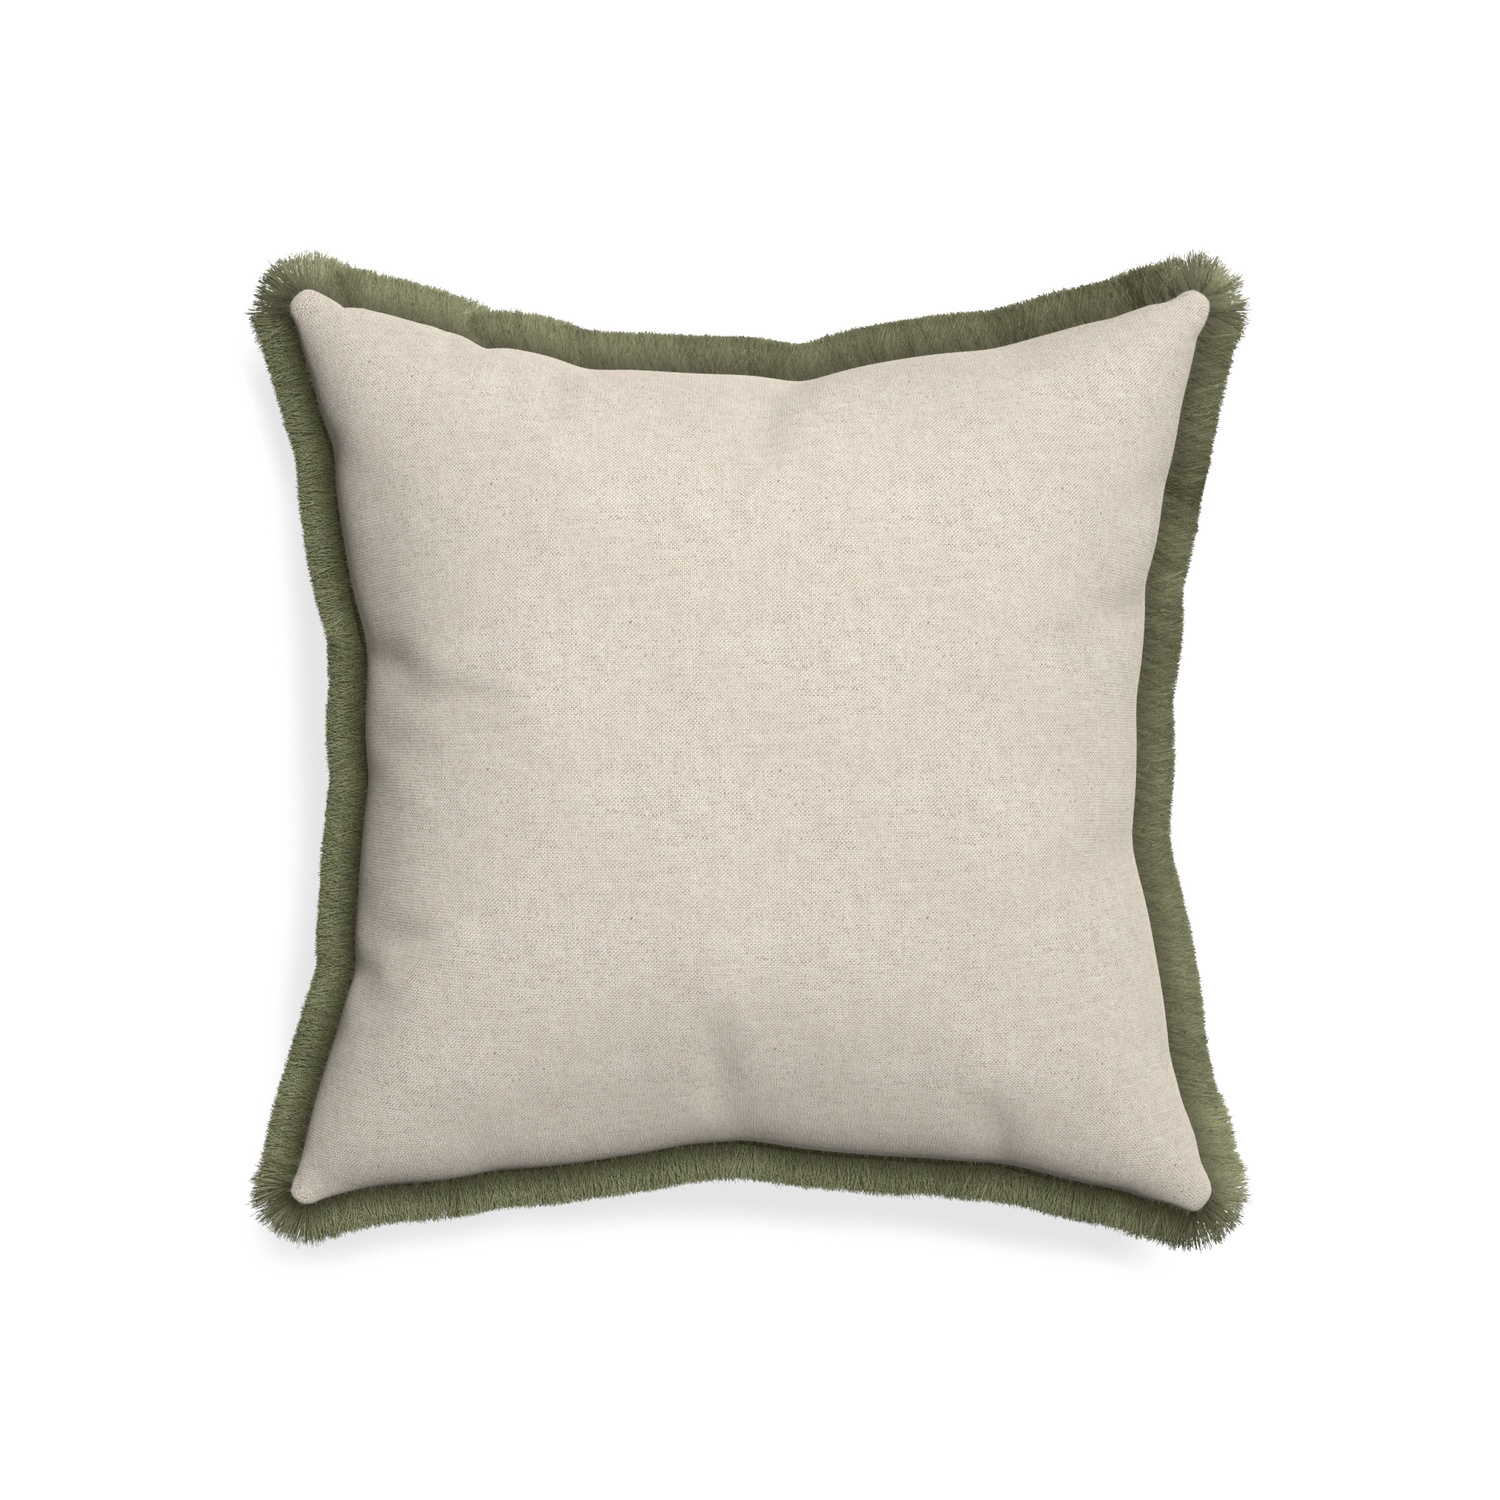 20-square oat custom pillow with sage fringe on white background